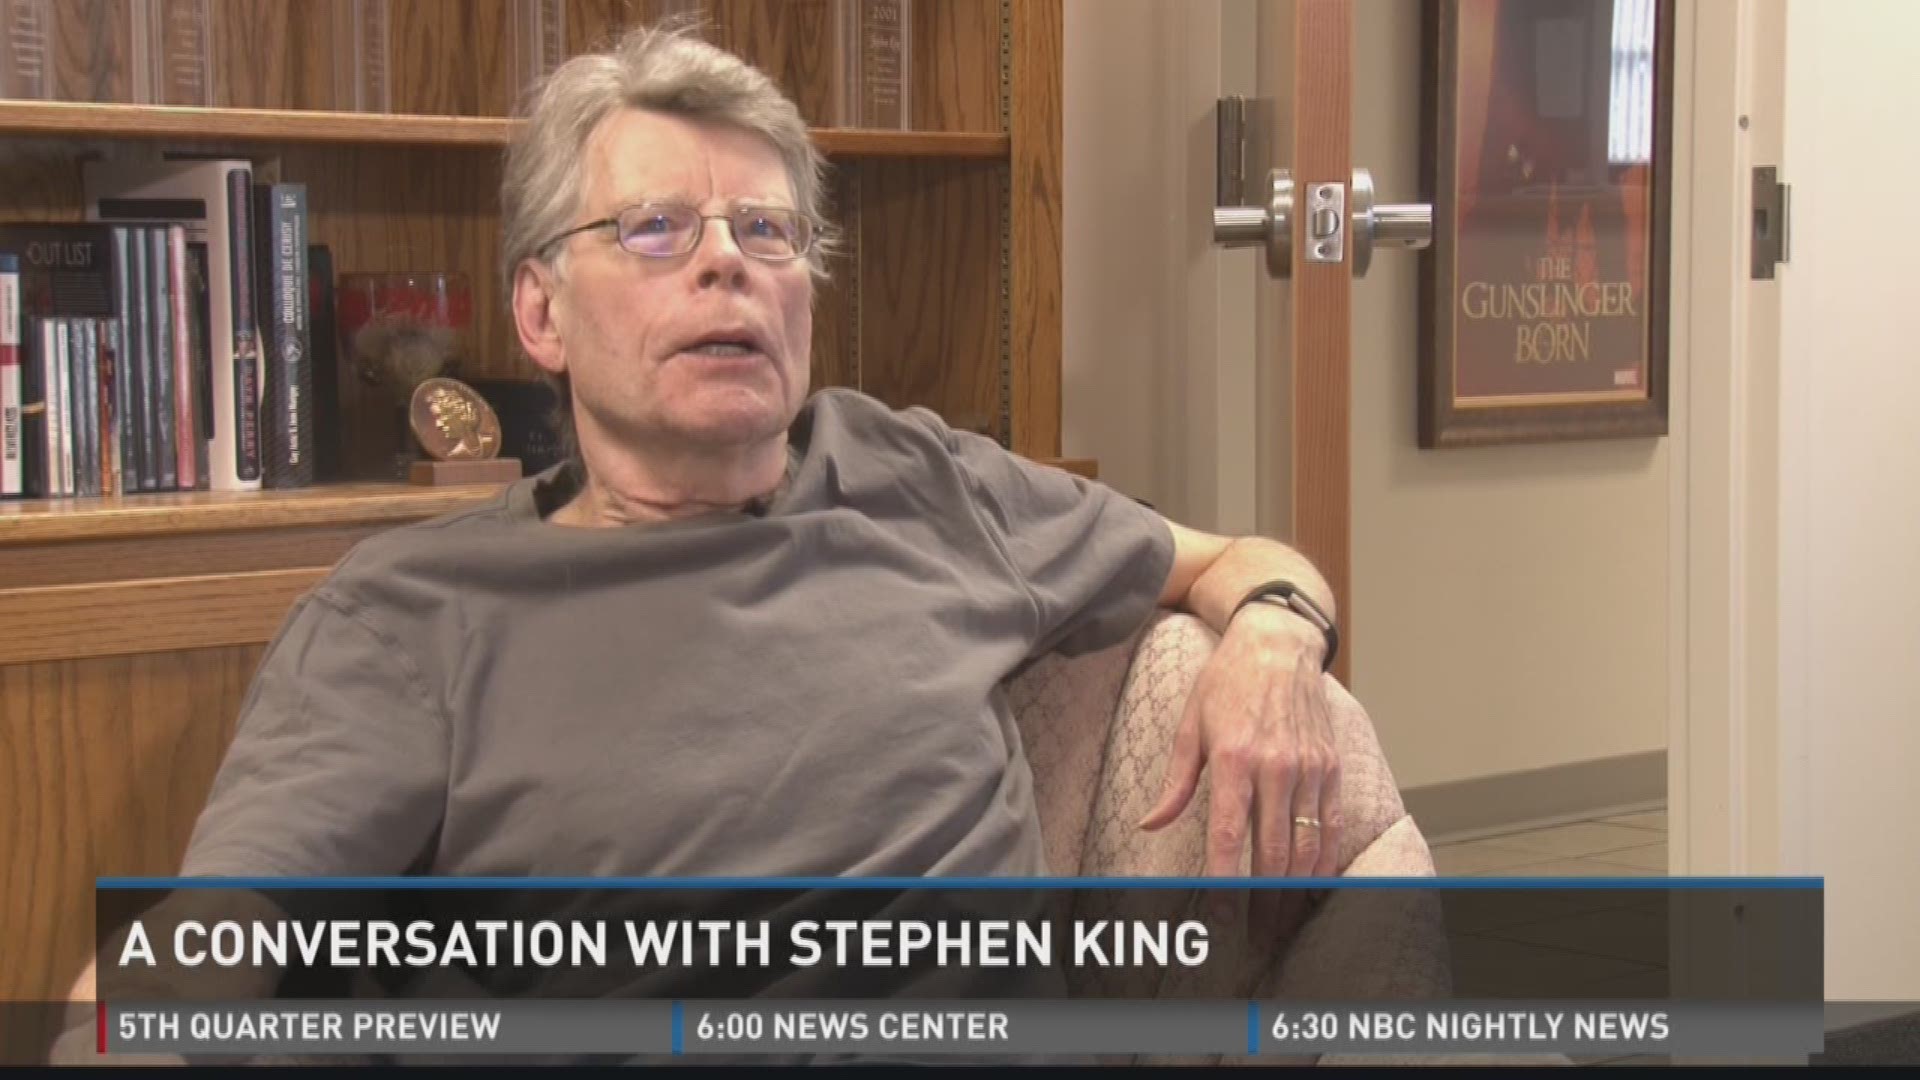 A conversation with Stephen King